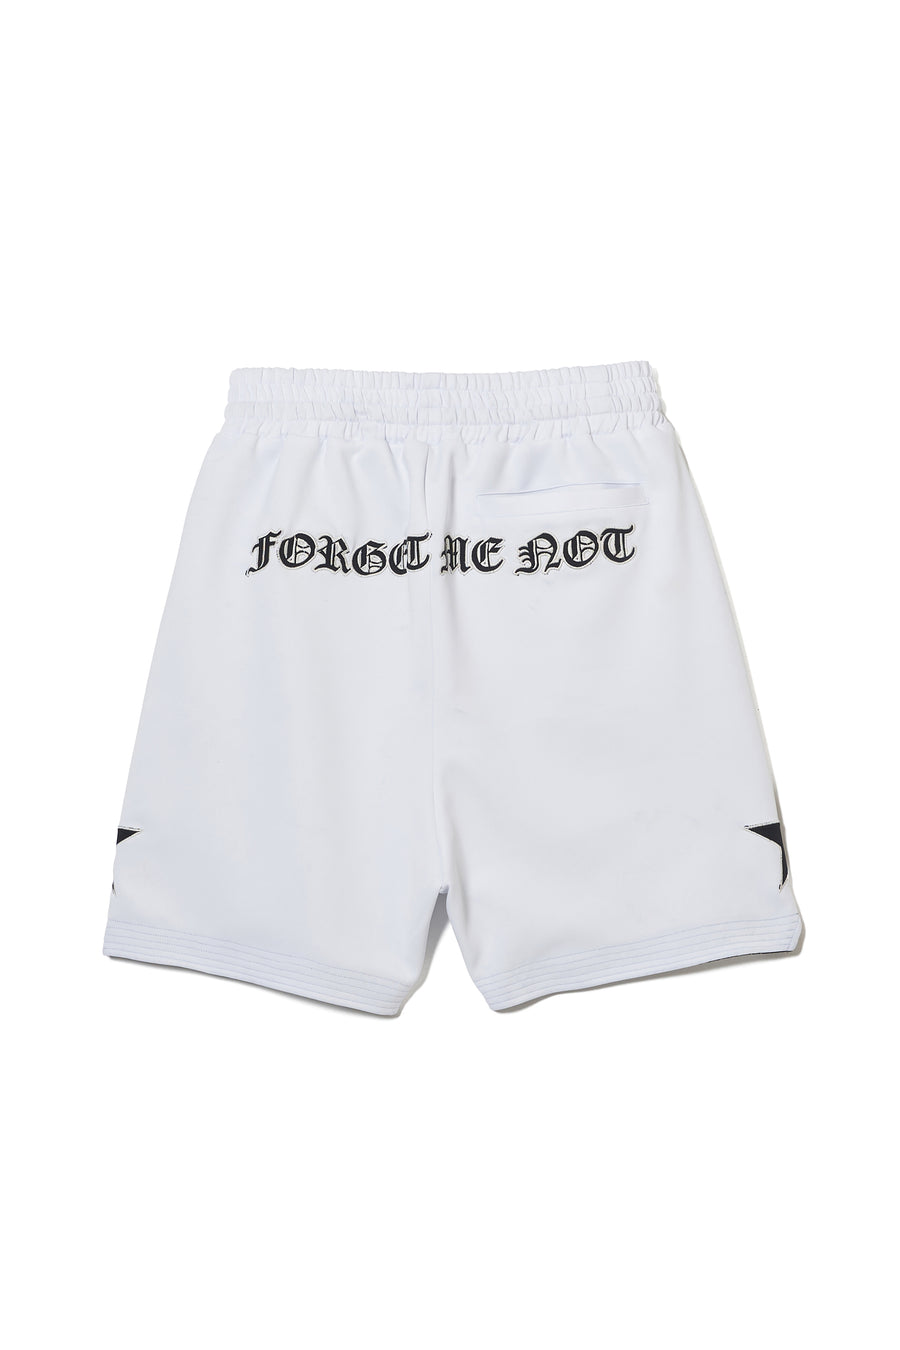 [Sales start in mid-March] MAYO Embroidery Game Shorts - WHITE